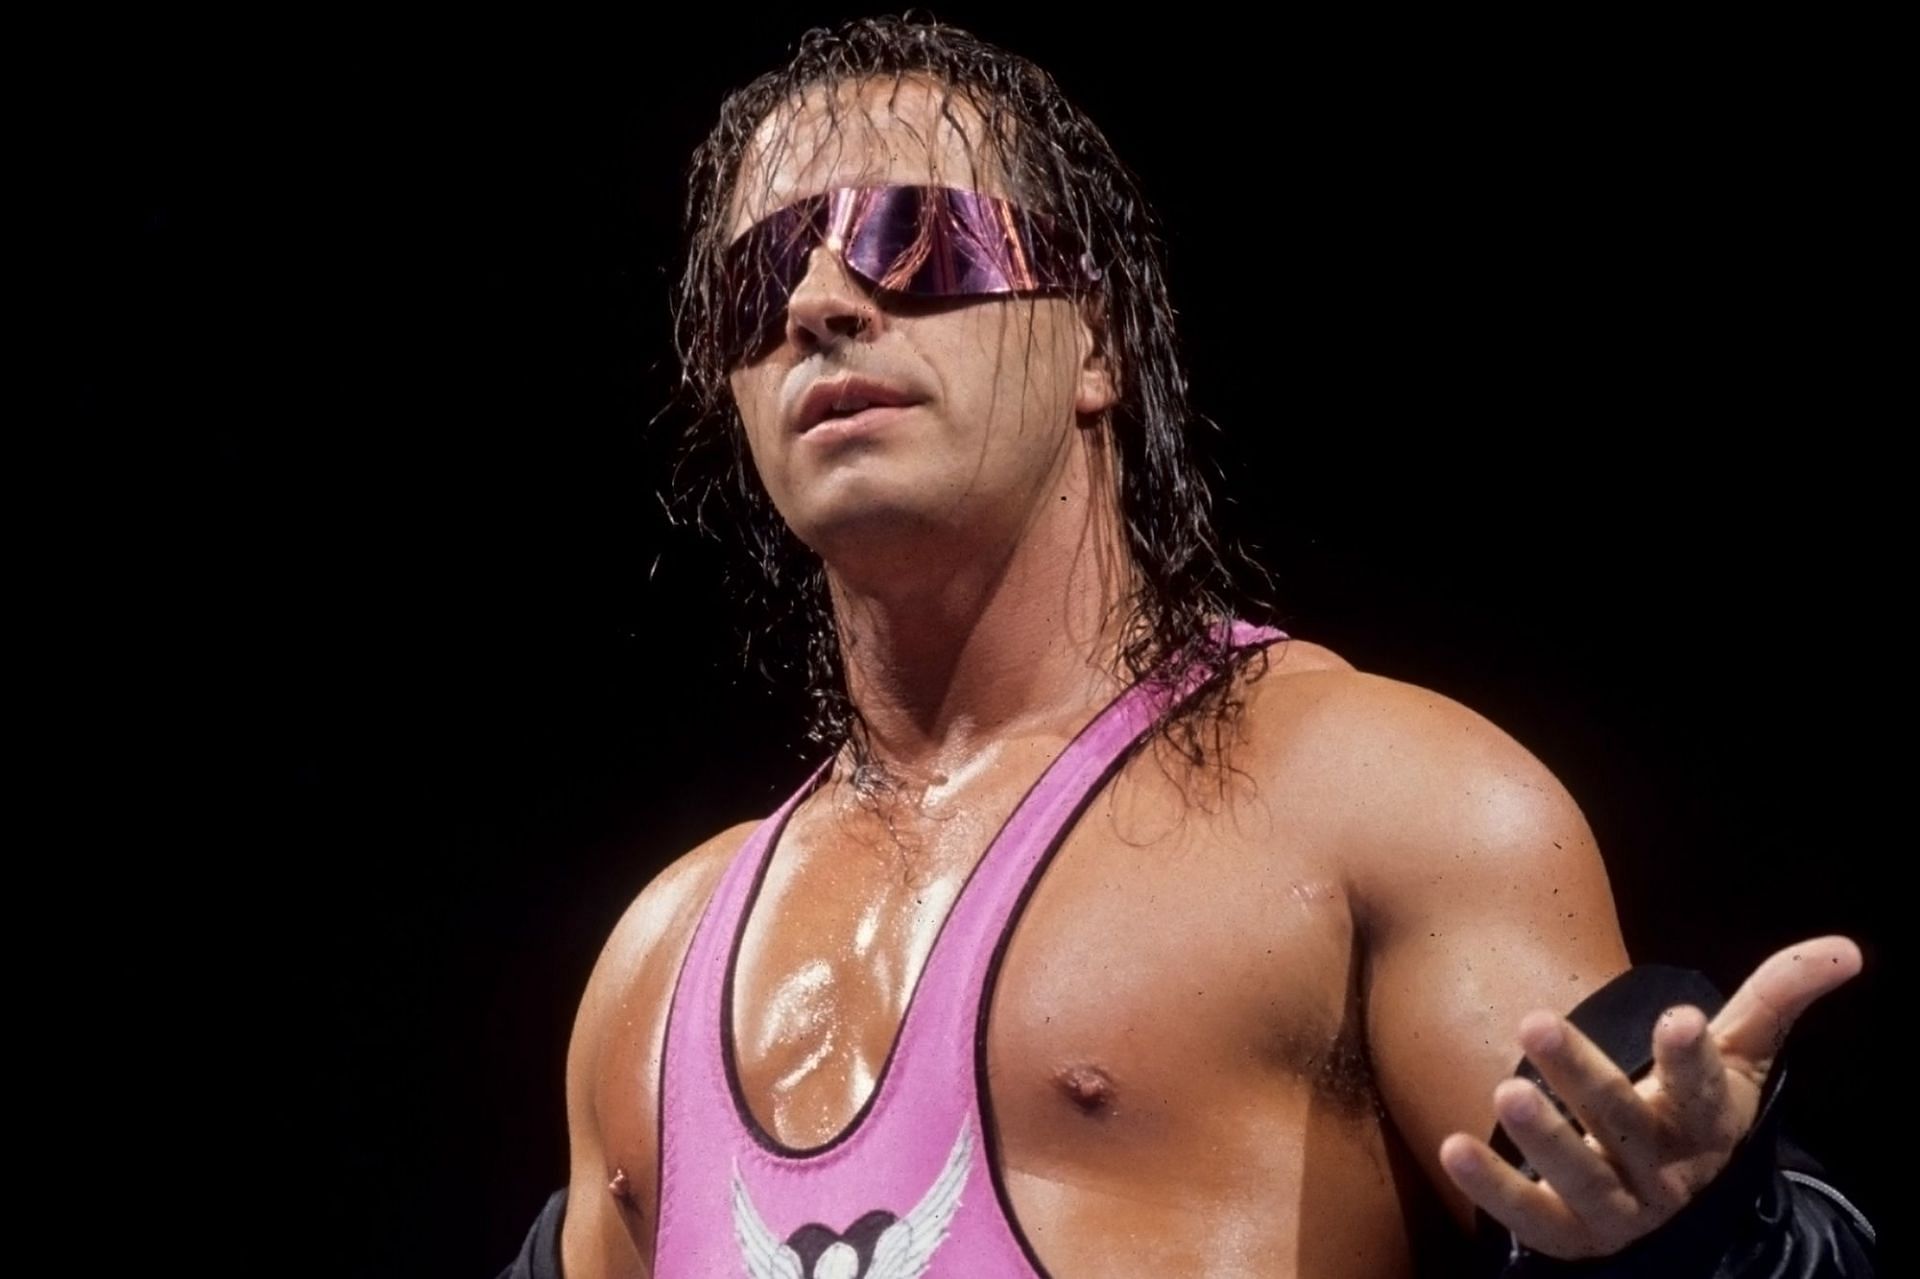 Bret Hart had a storied rivalry with Stone Cold Steve Austin